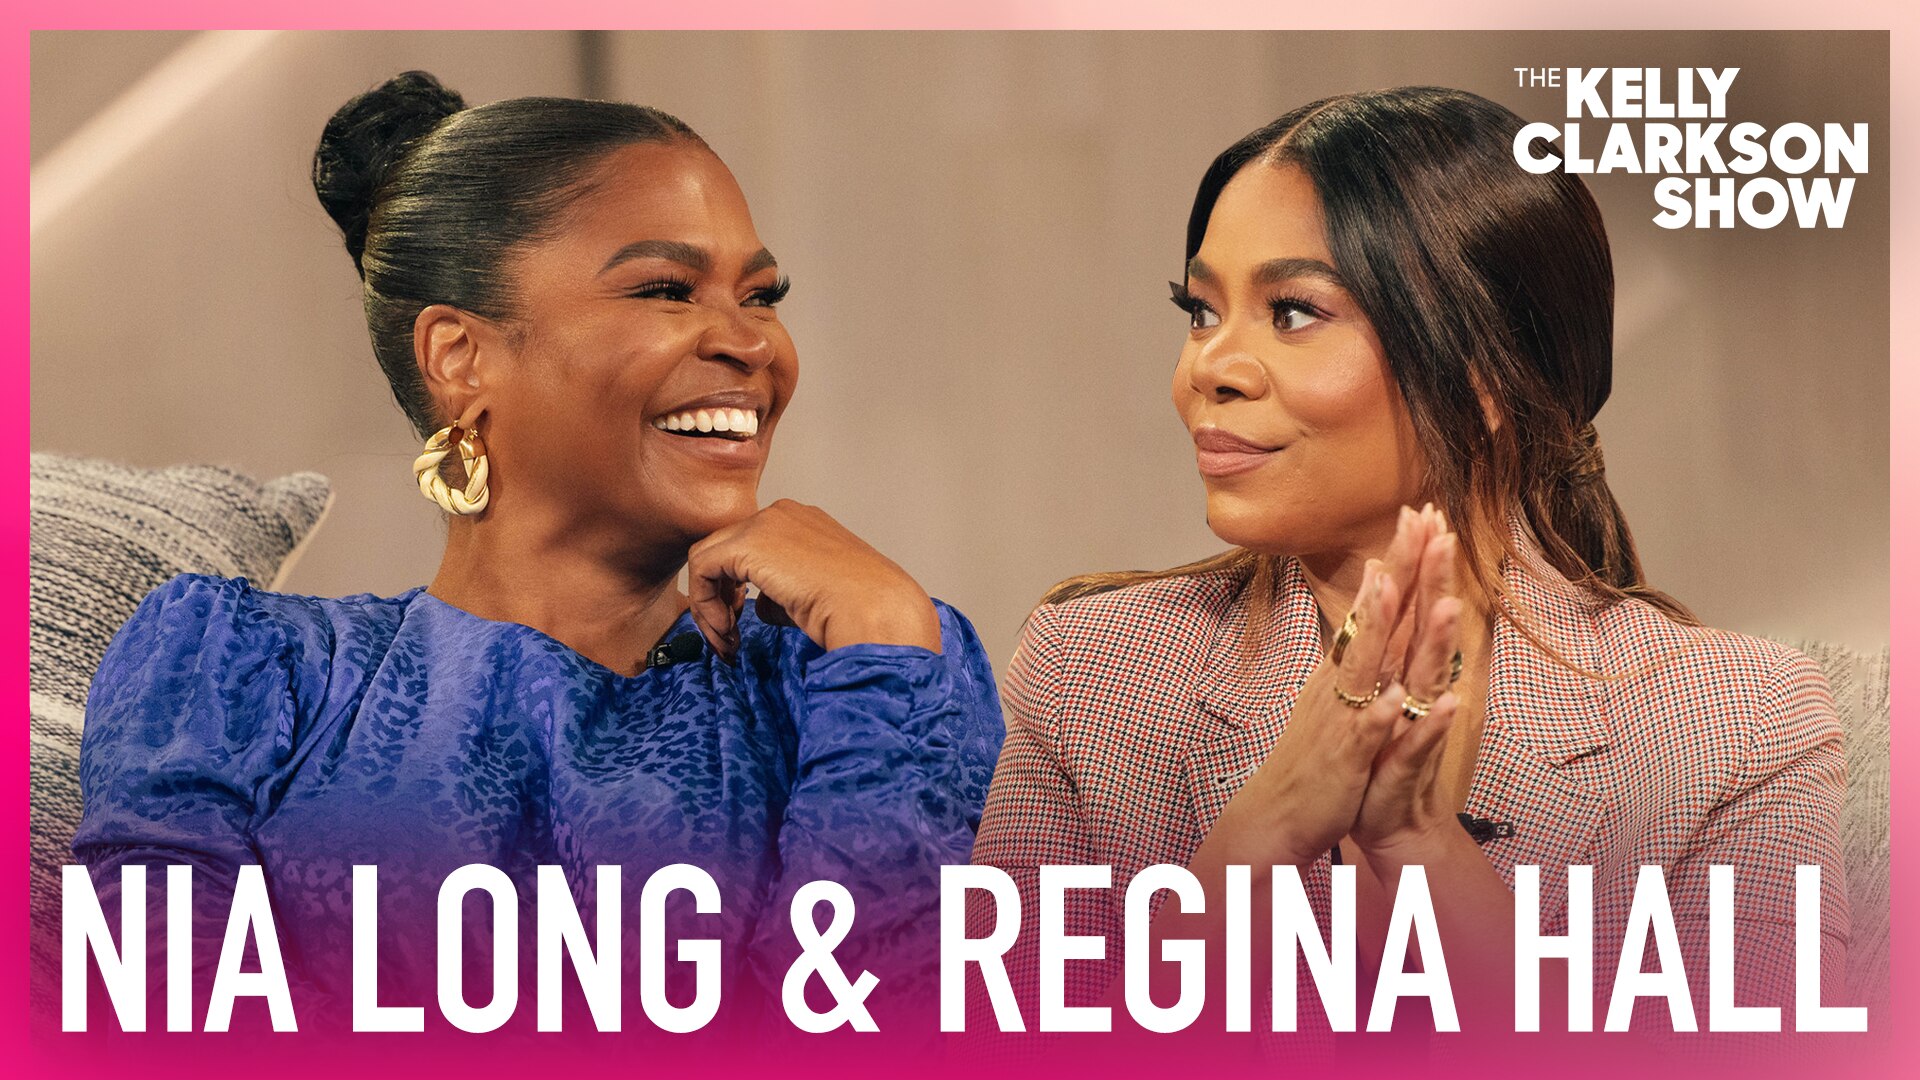 Are nia long and regina hall related